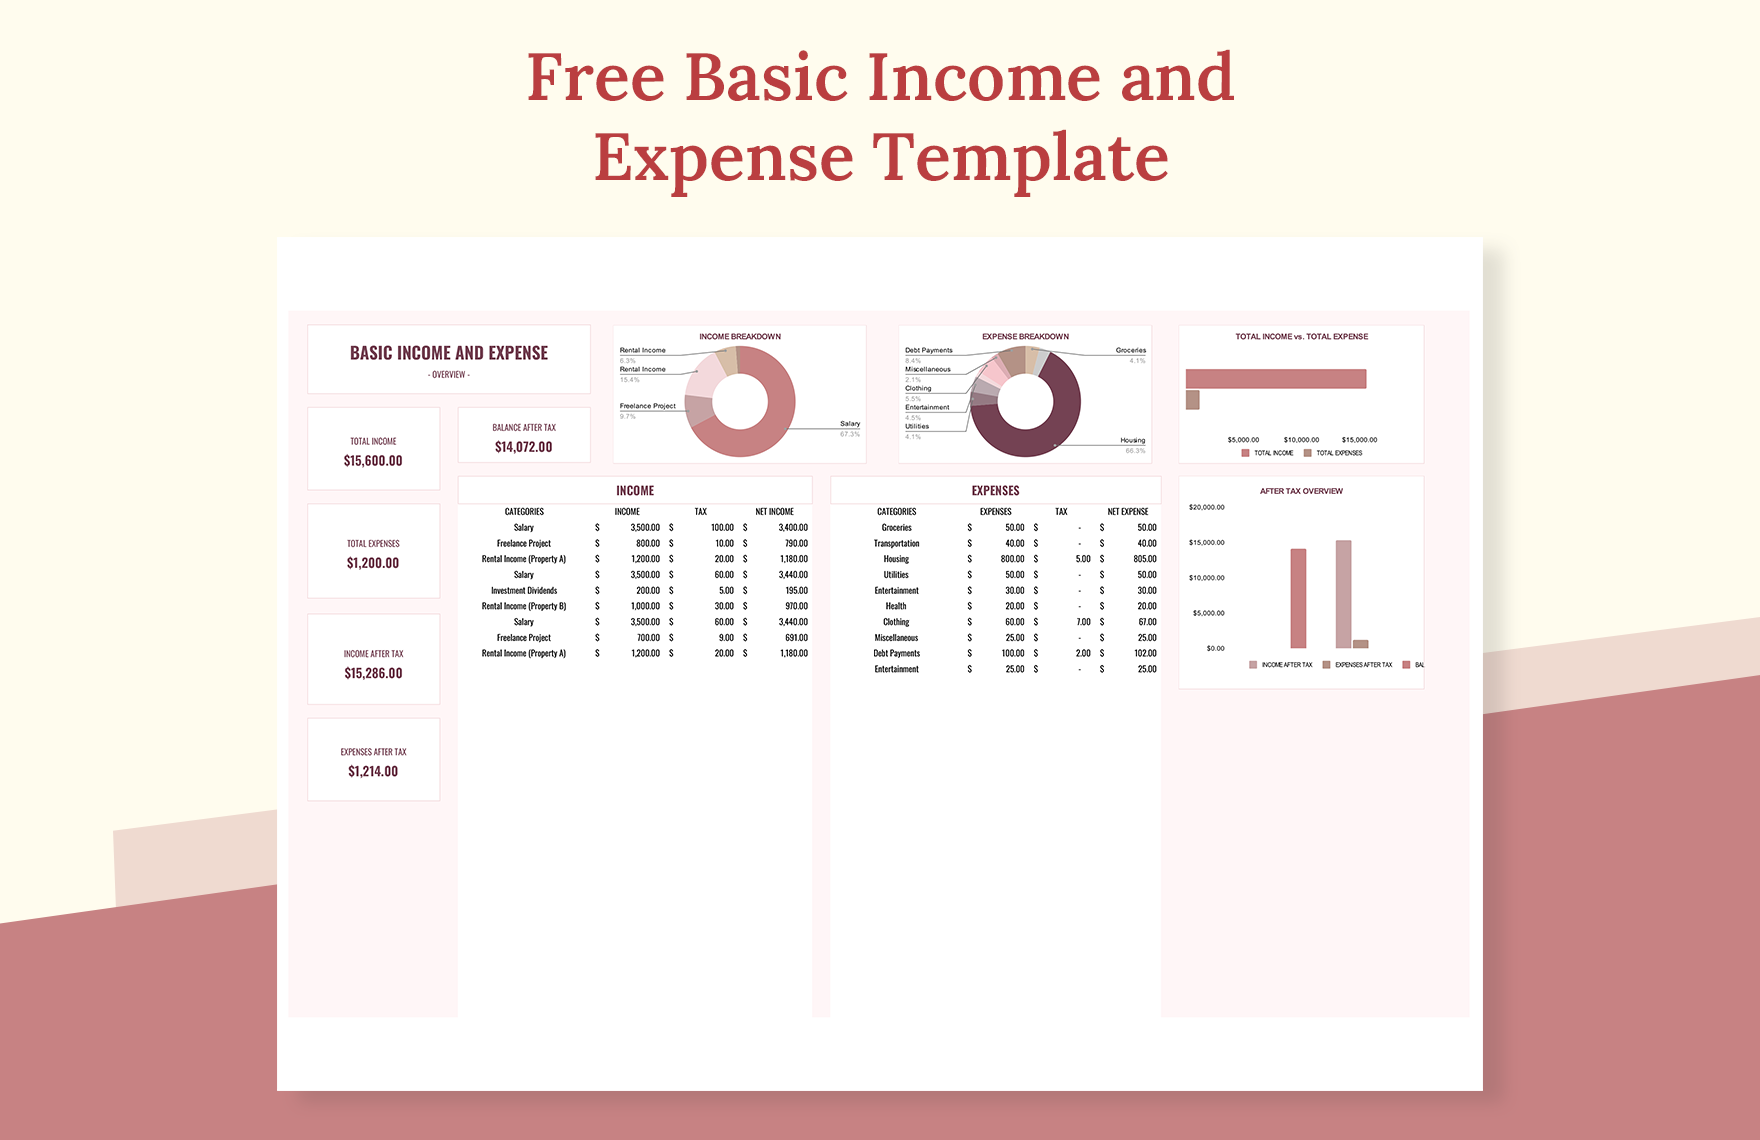 Free Basic income and expense template